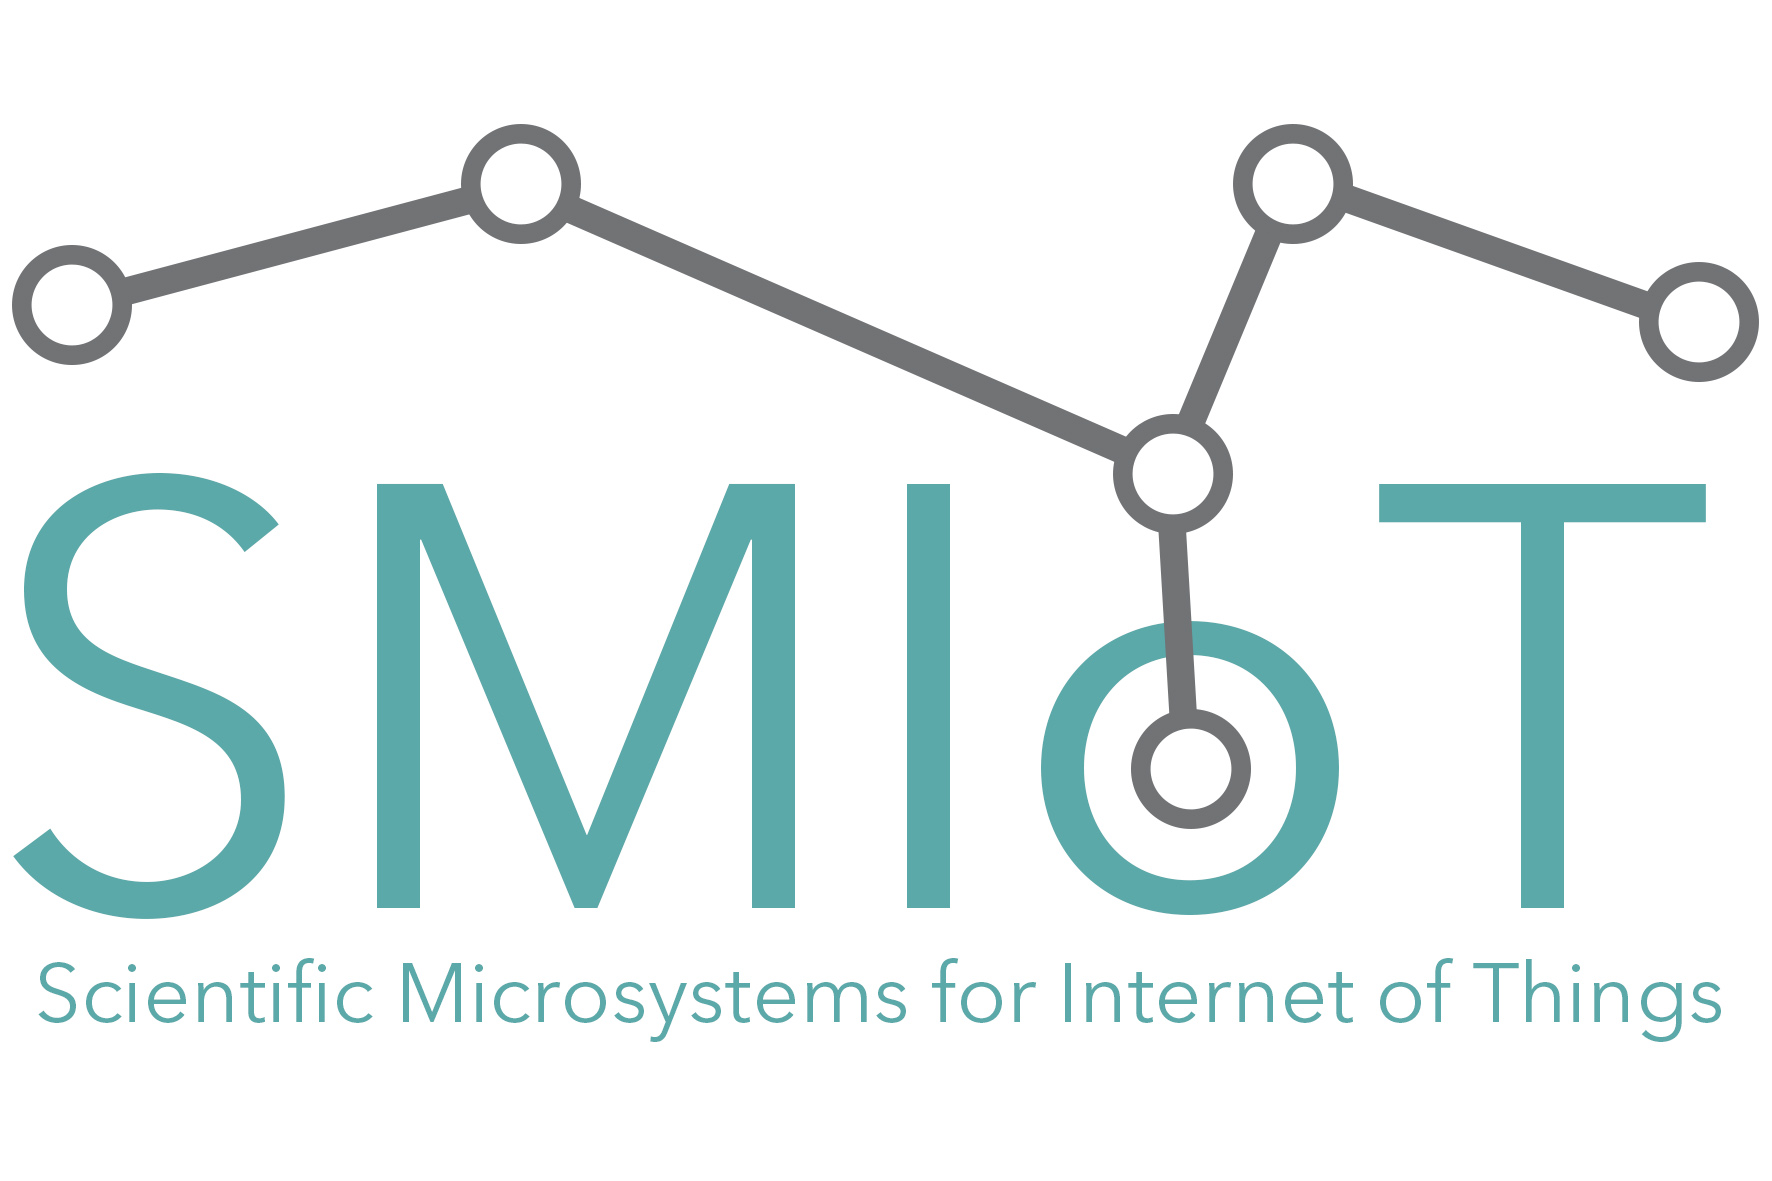 SMIOT - Scientific Microsystems for Internet of Things